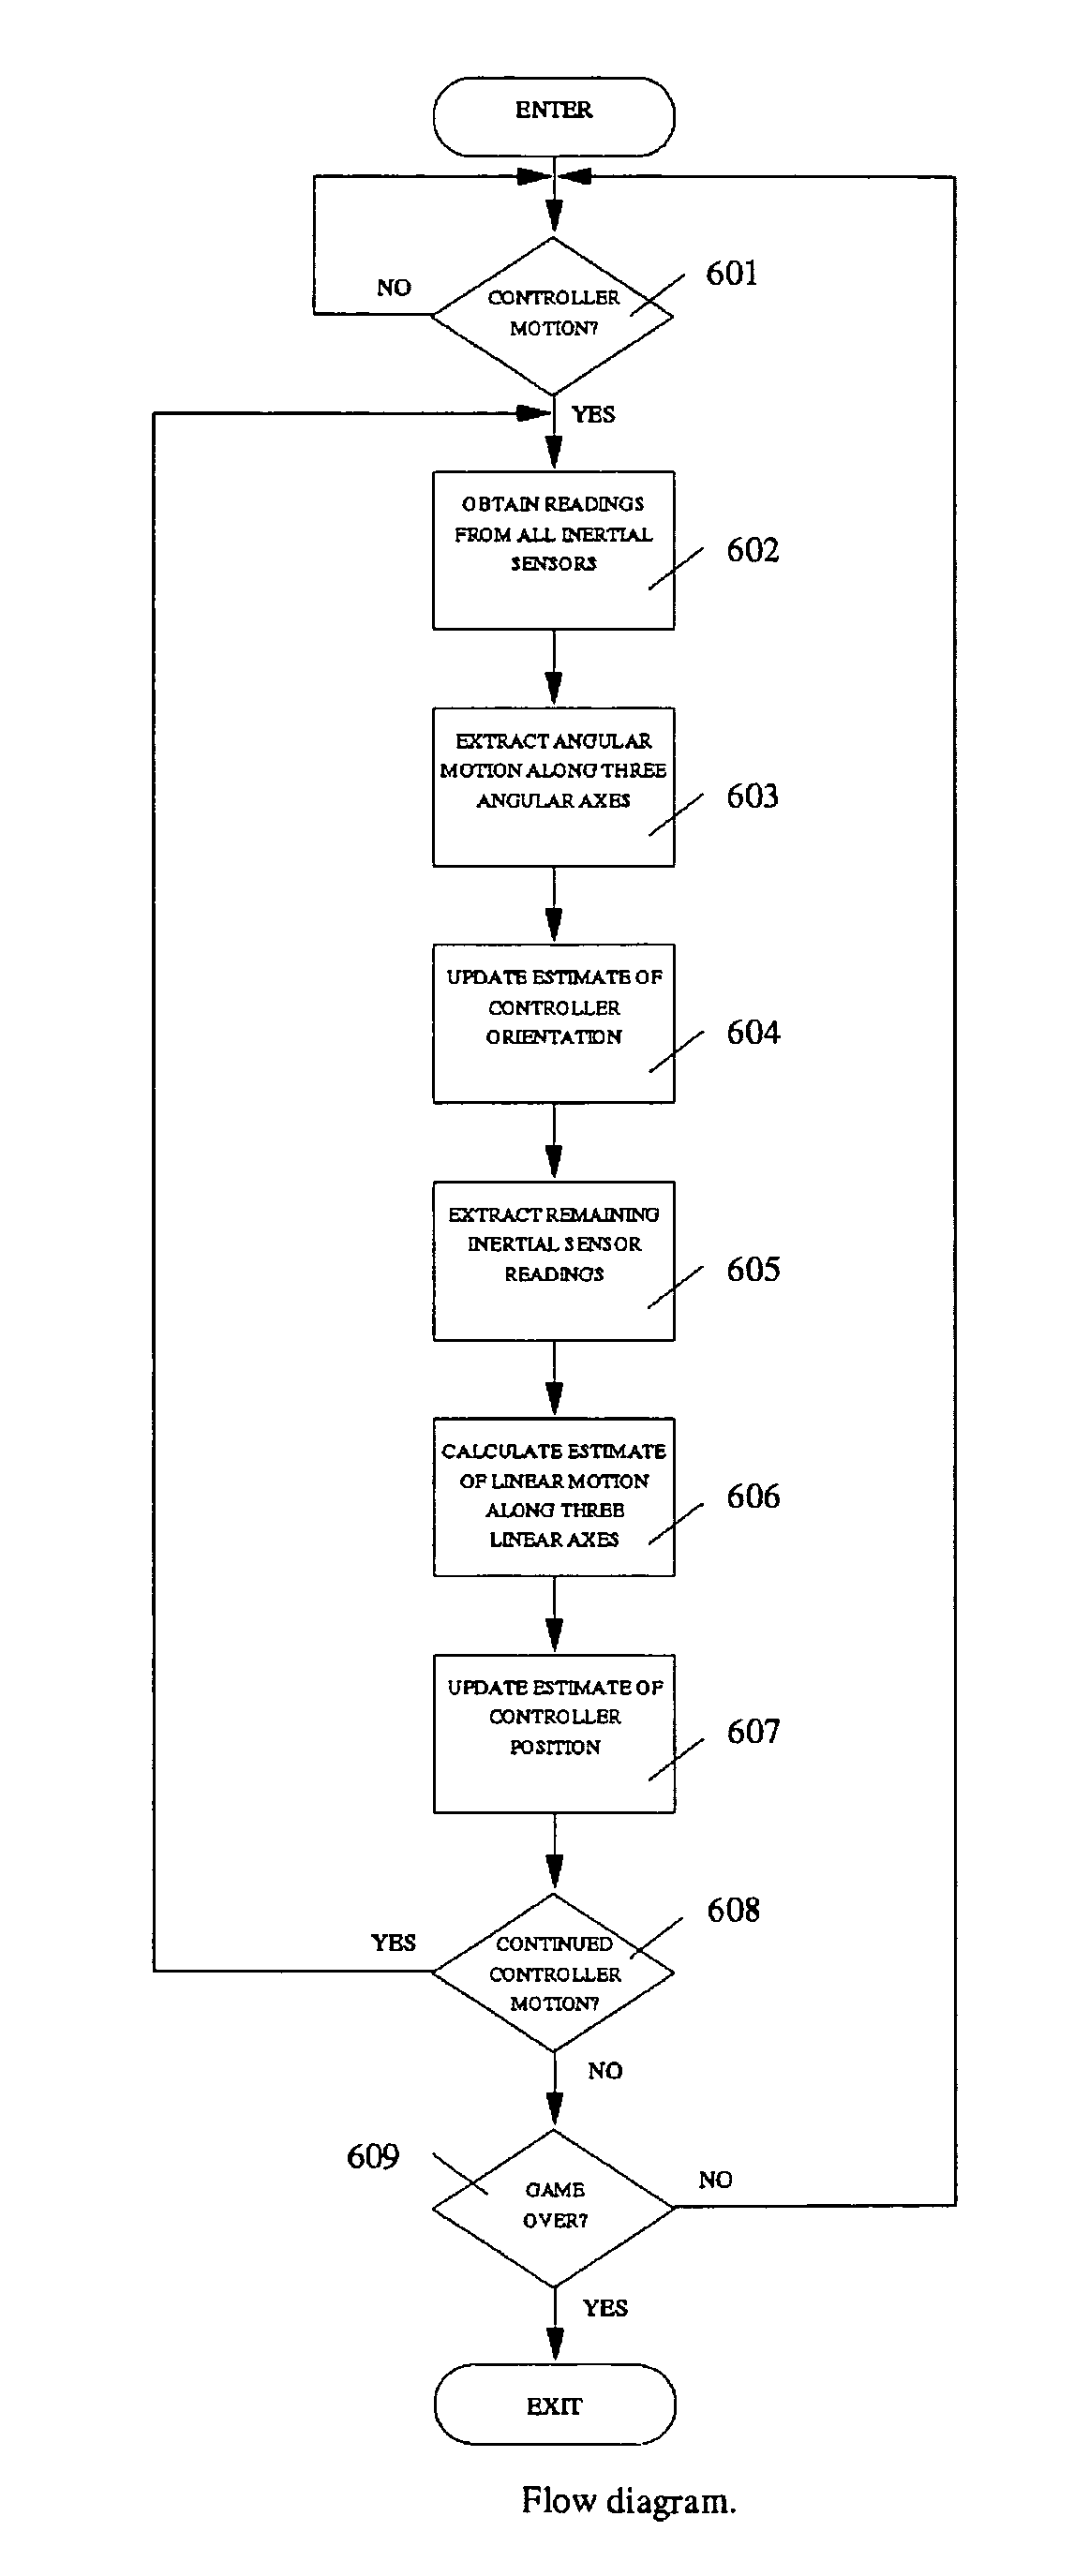 Self-contained inertial navigation system for interactive control using movable controllers